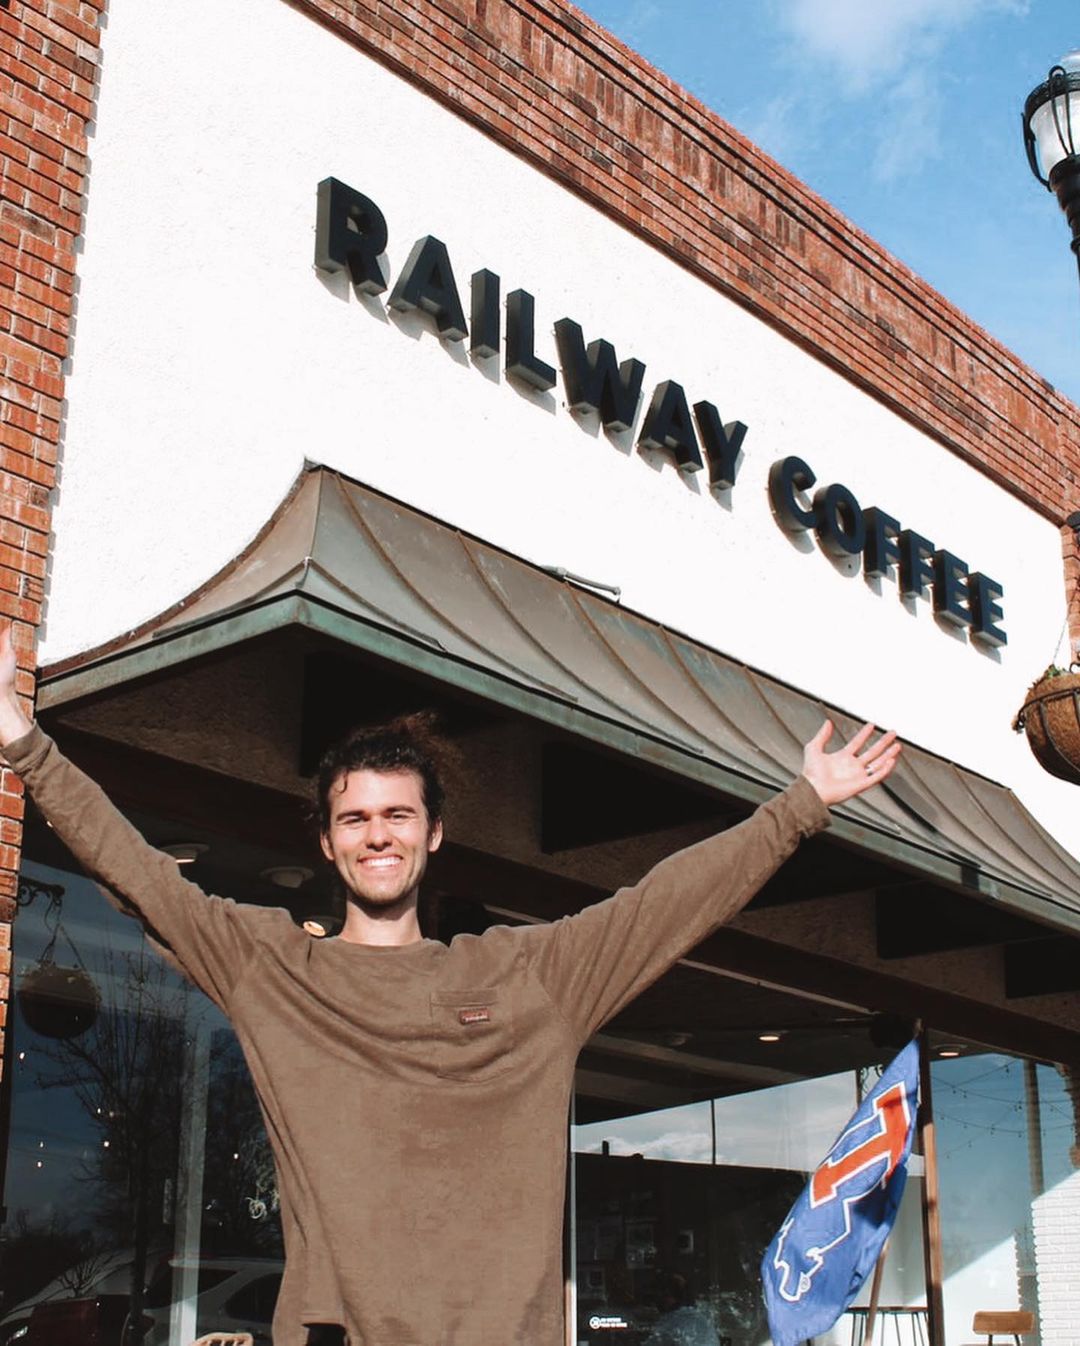 A photo shoeing John Luke with arms high in the sky and a bright smile at one of the railway coffee locations.